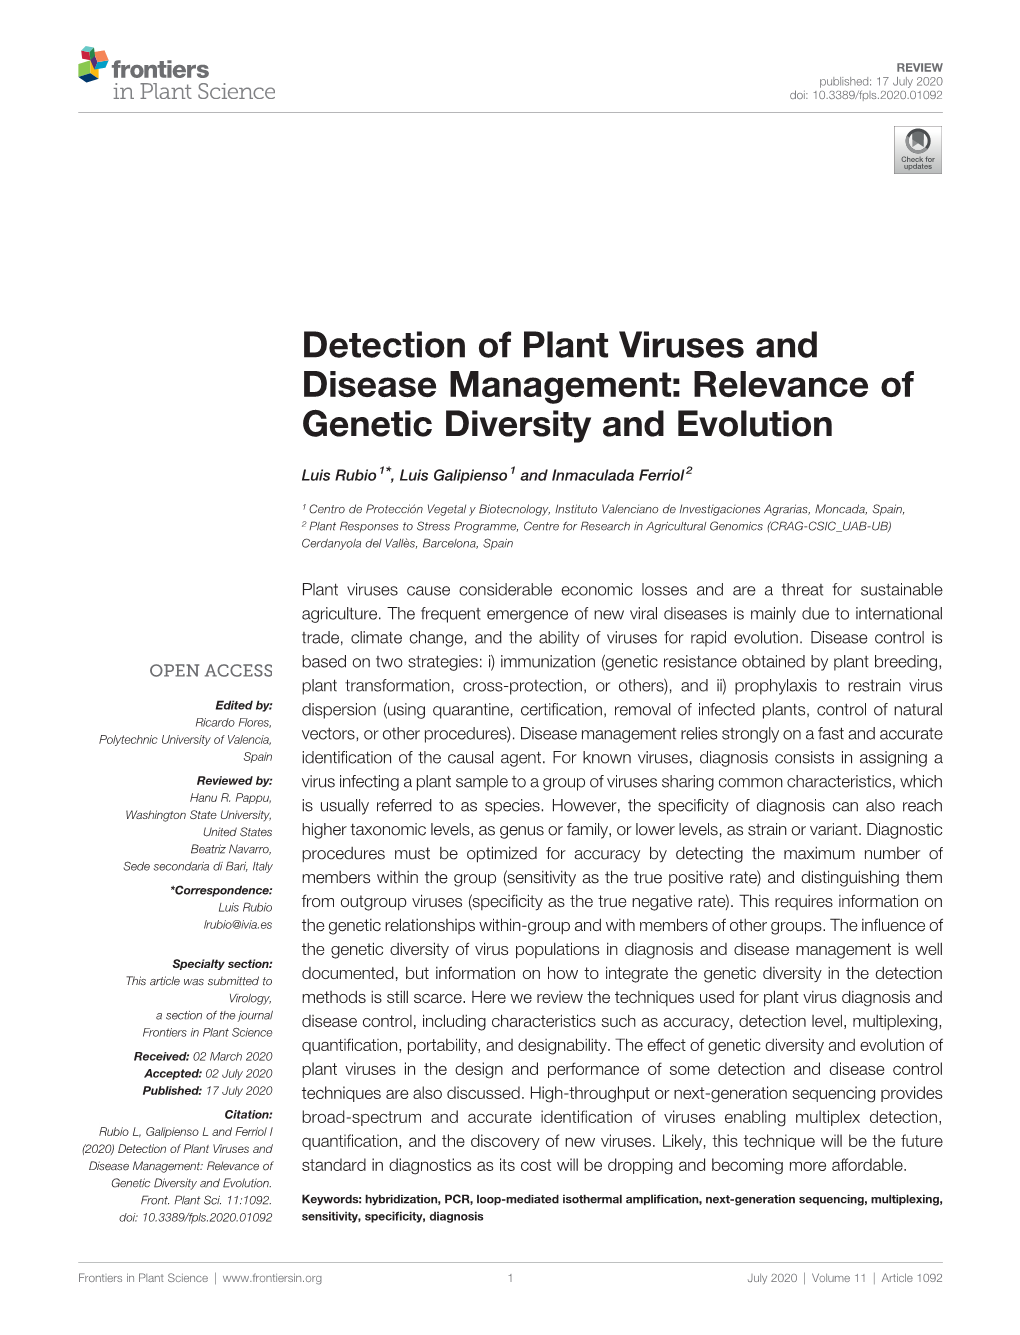 Detection of Plant Viruses and Disease Management: Relevance of Genetic Diversity and Evolution